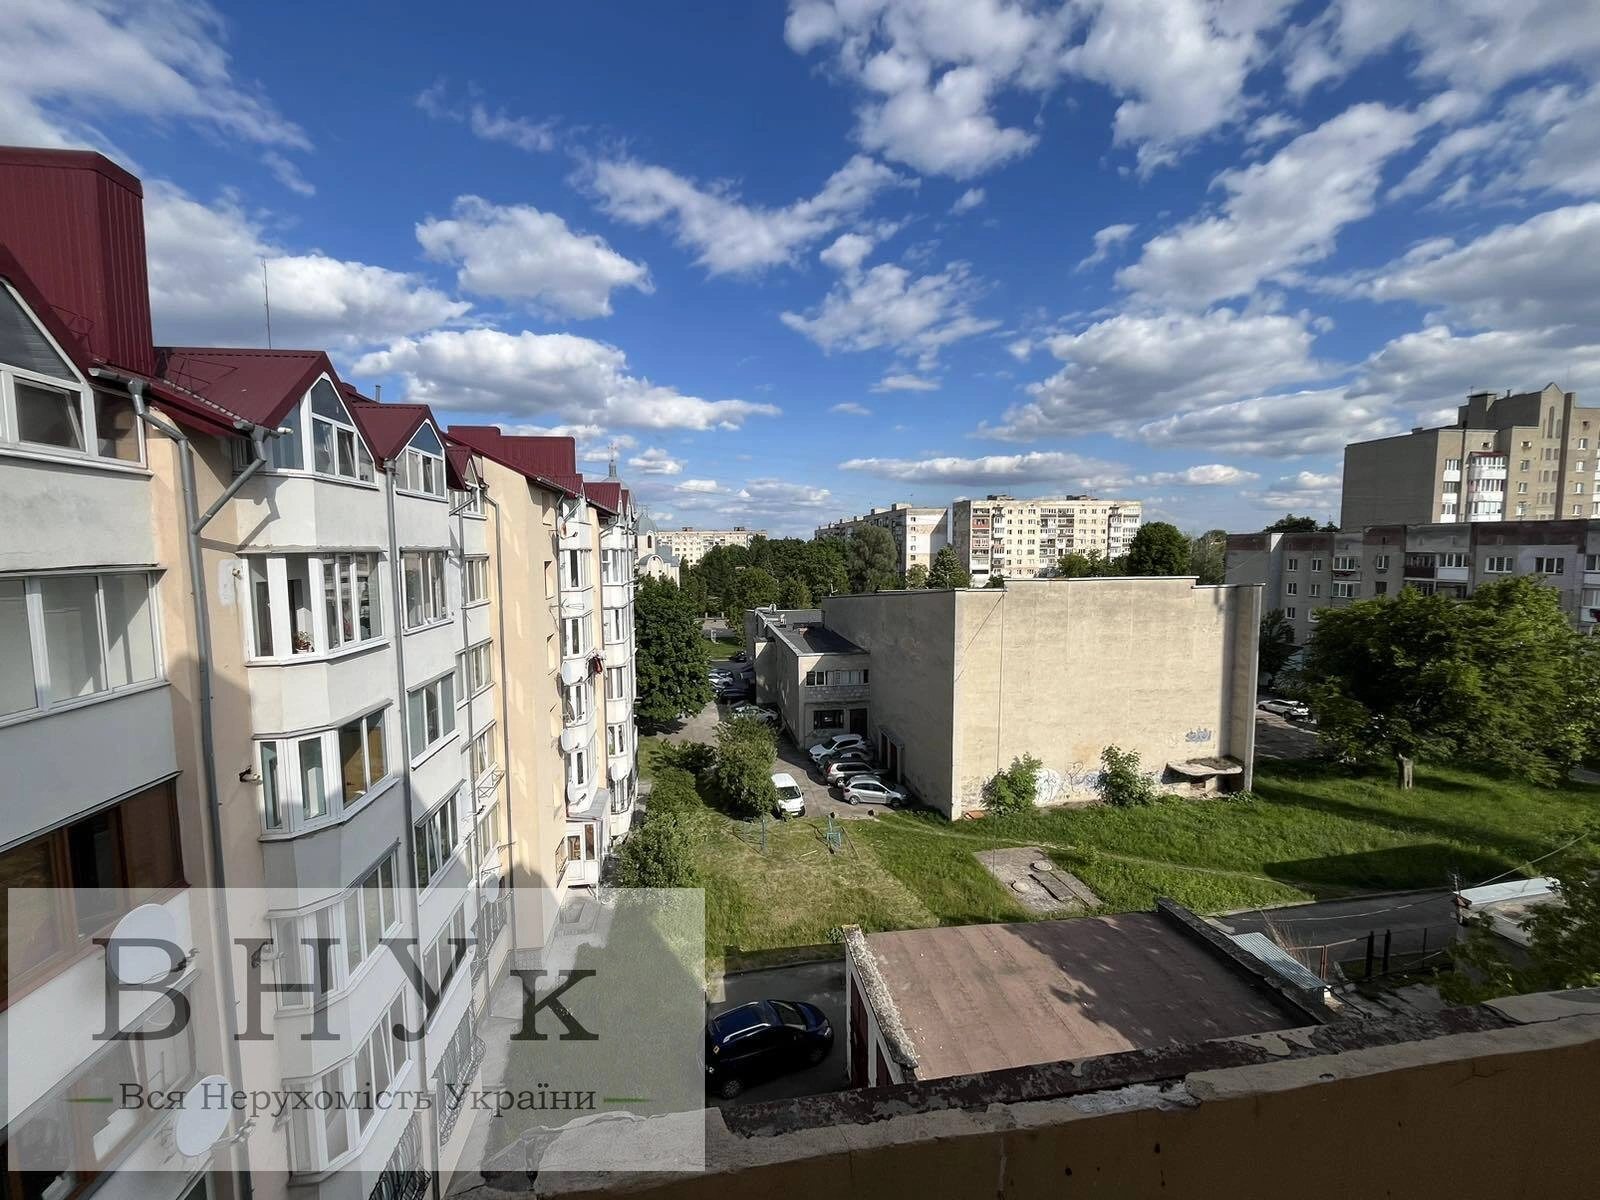 Apartments for sale. 1 room, 43 m², 4th floor/9 floors. Bandery S. vul., Ternopil. 